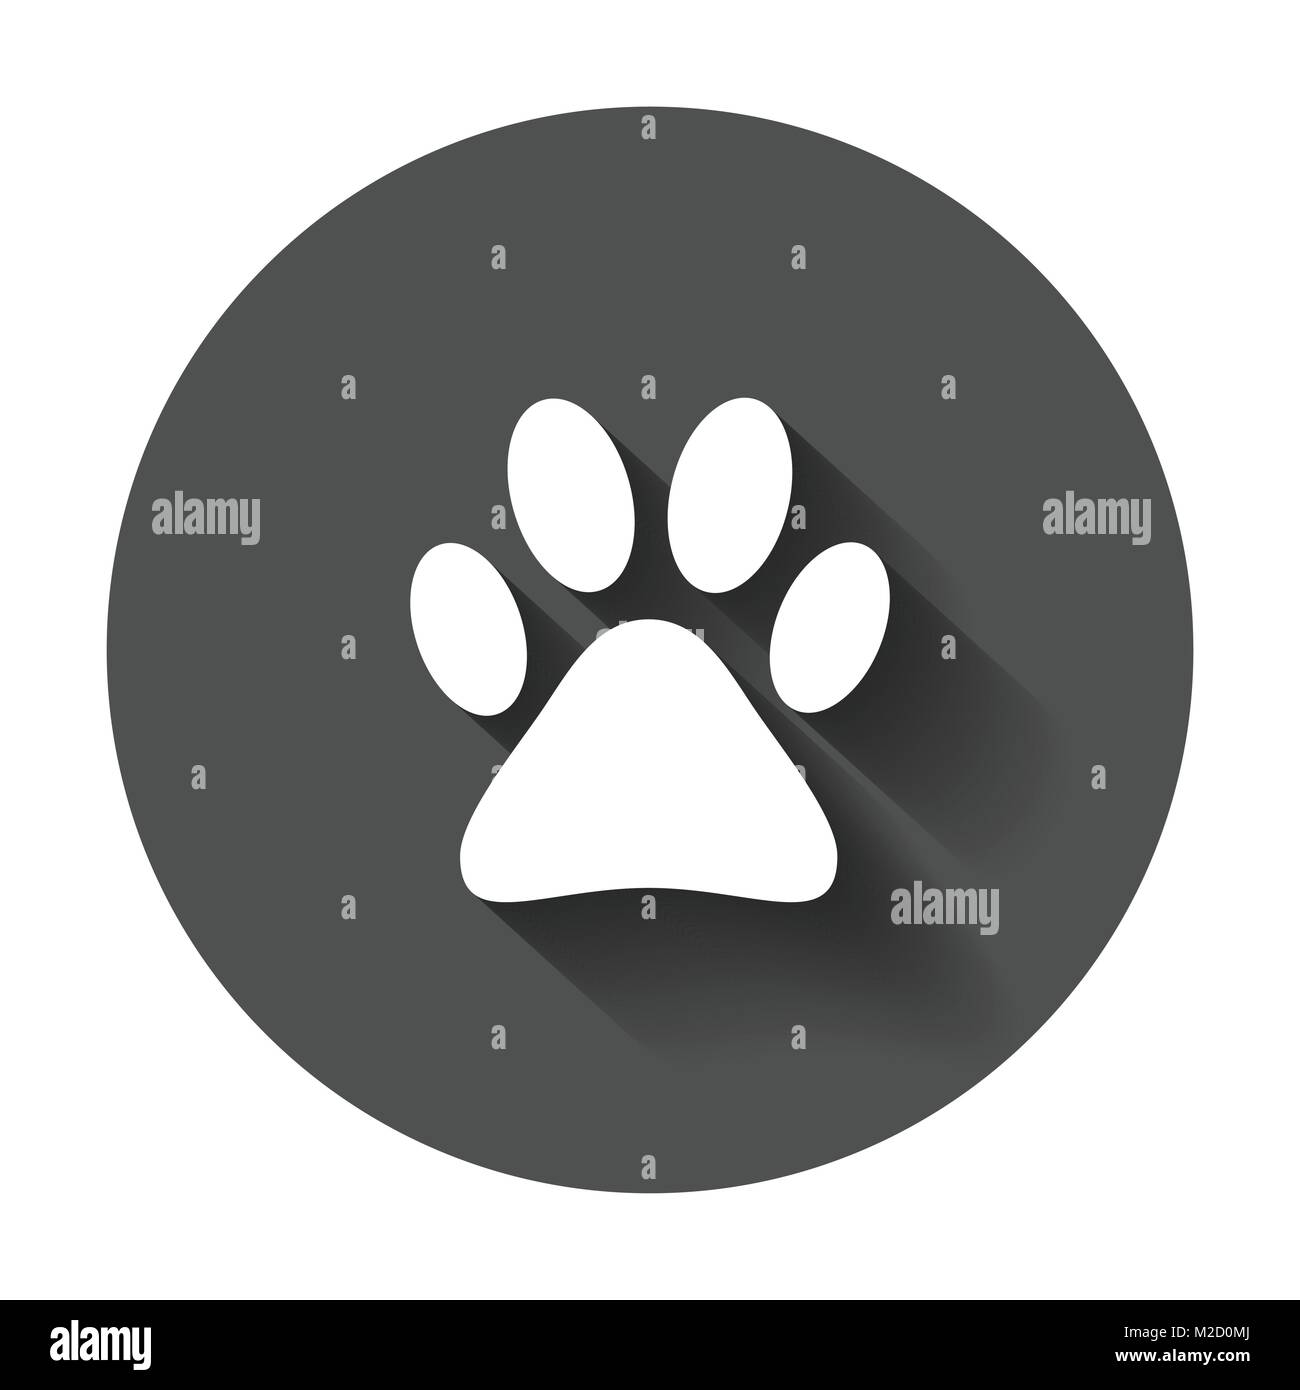 Tiger Dog Or Cat Set Paw Print Flat Icon For Animal Apps And